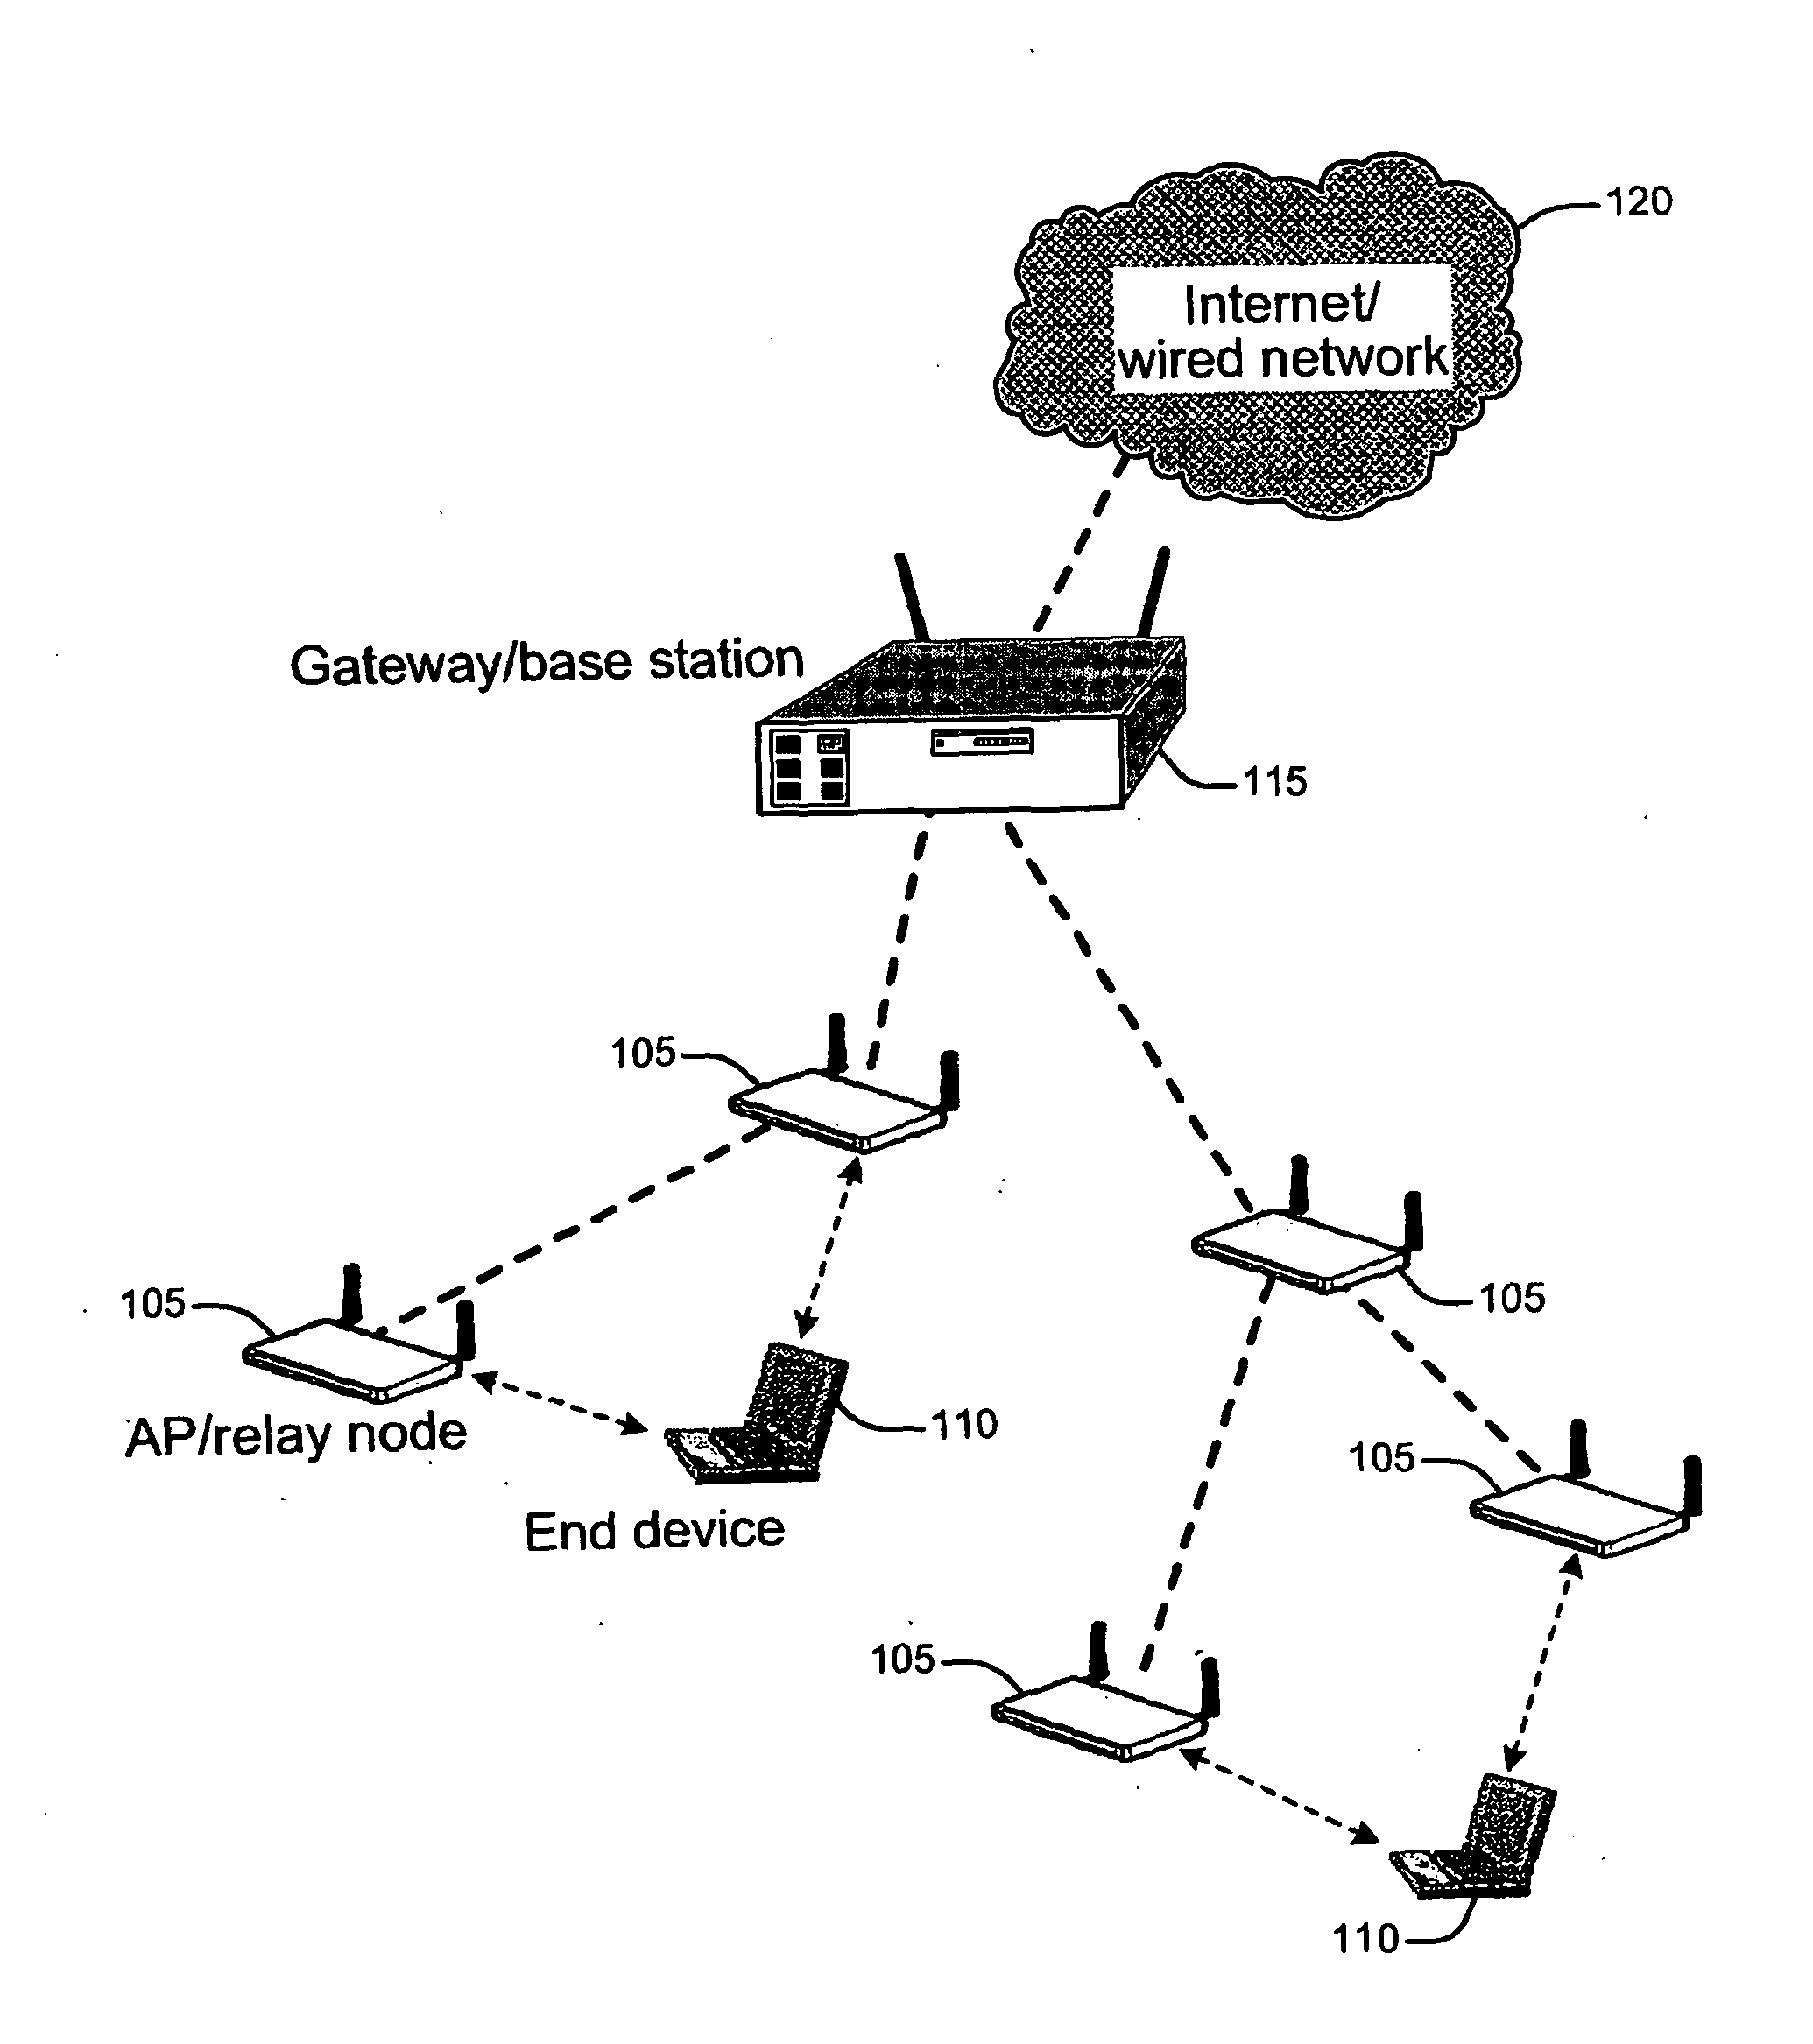 Method to select access point and relay node in multi-hop wireless networking